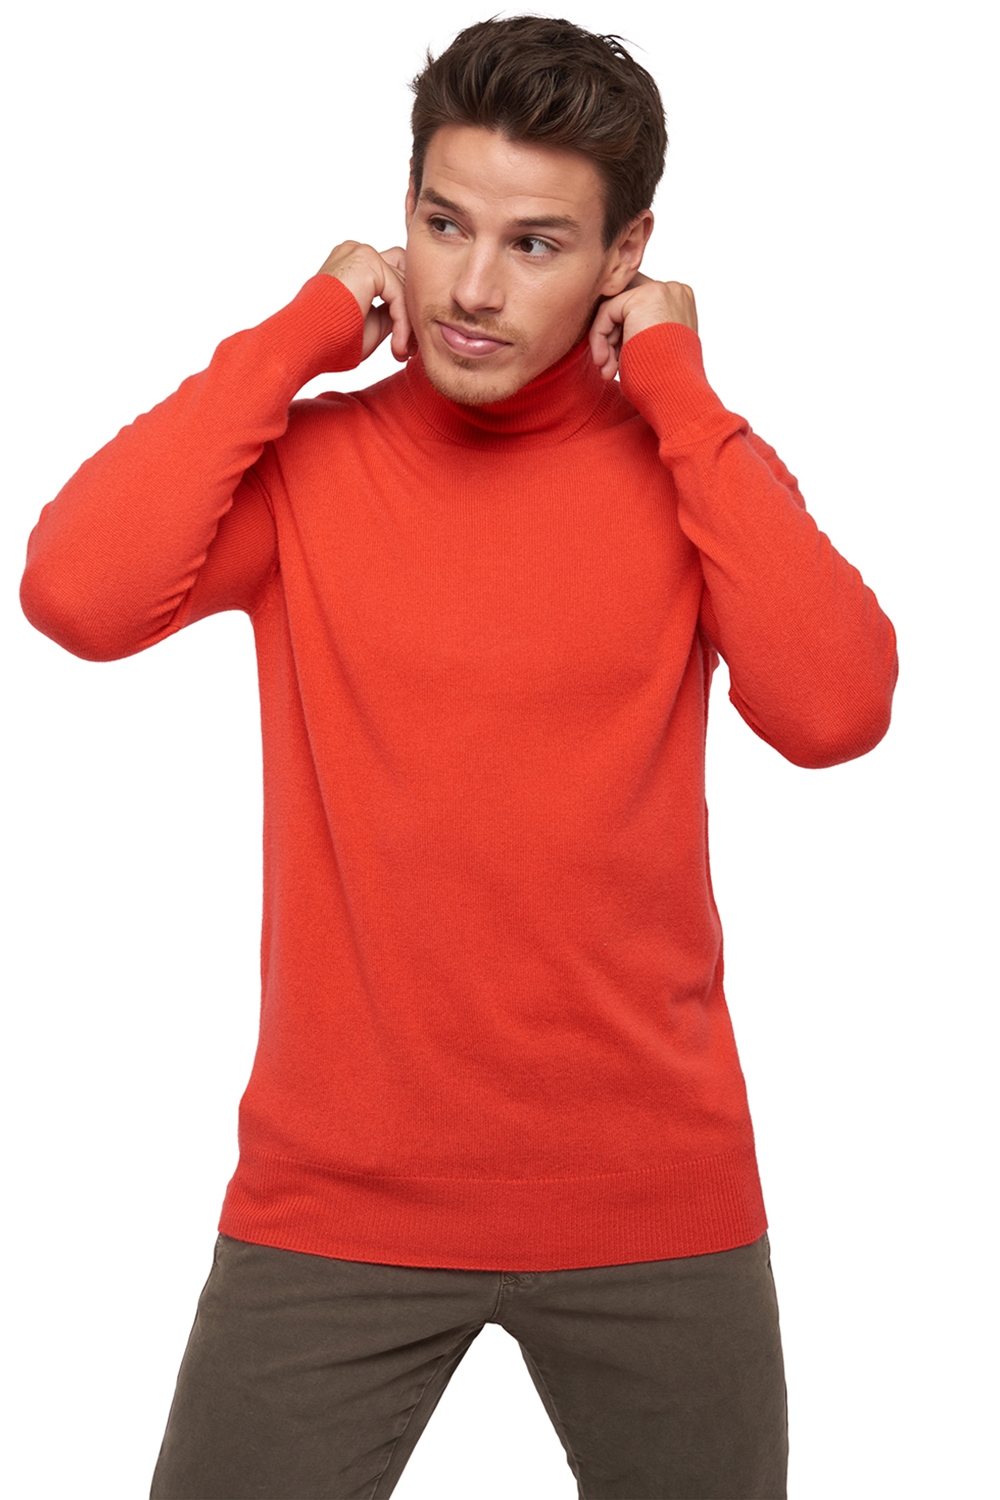 Cashmere men basic sweaters at low prices tarry first pinkorange m